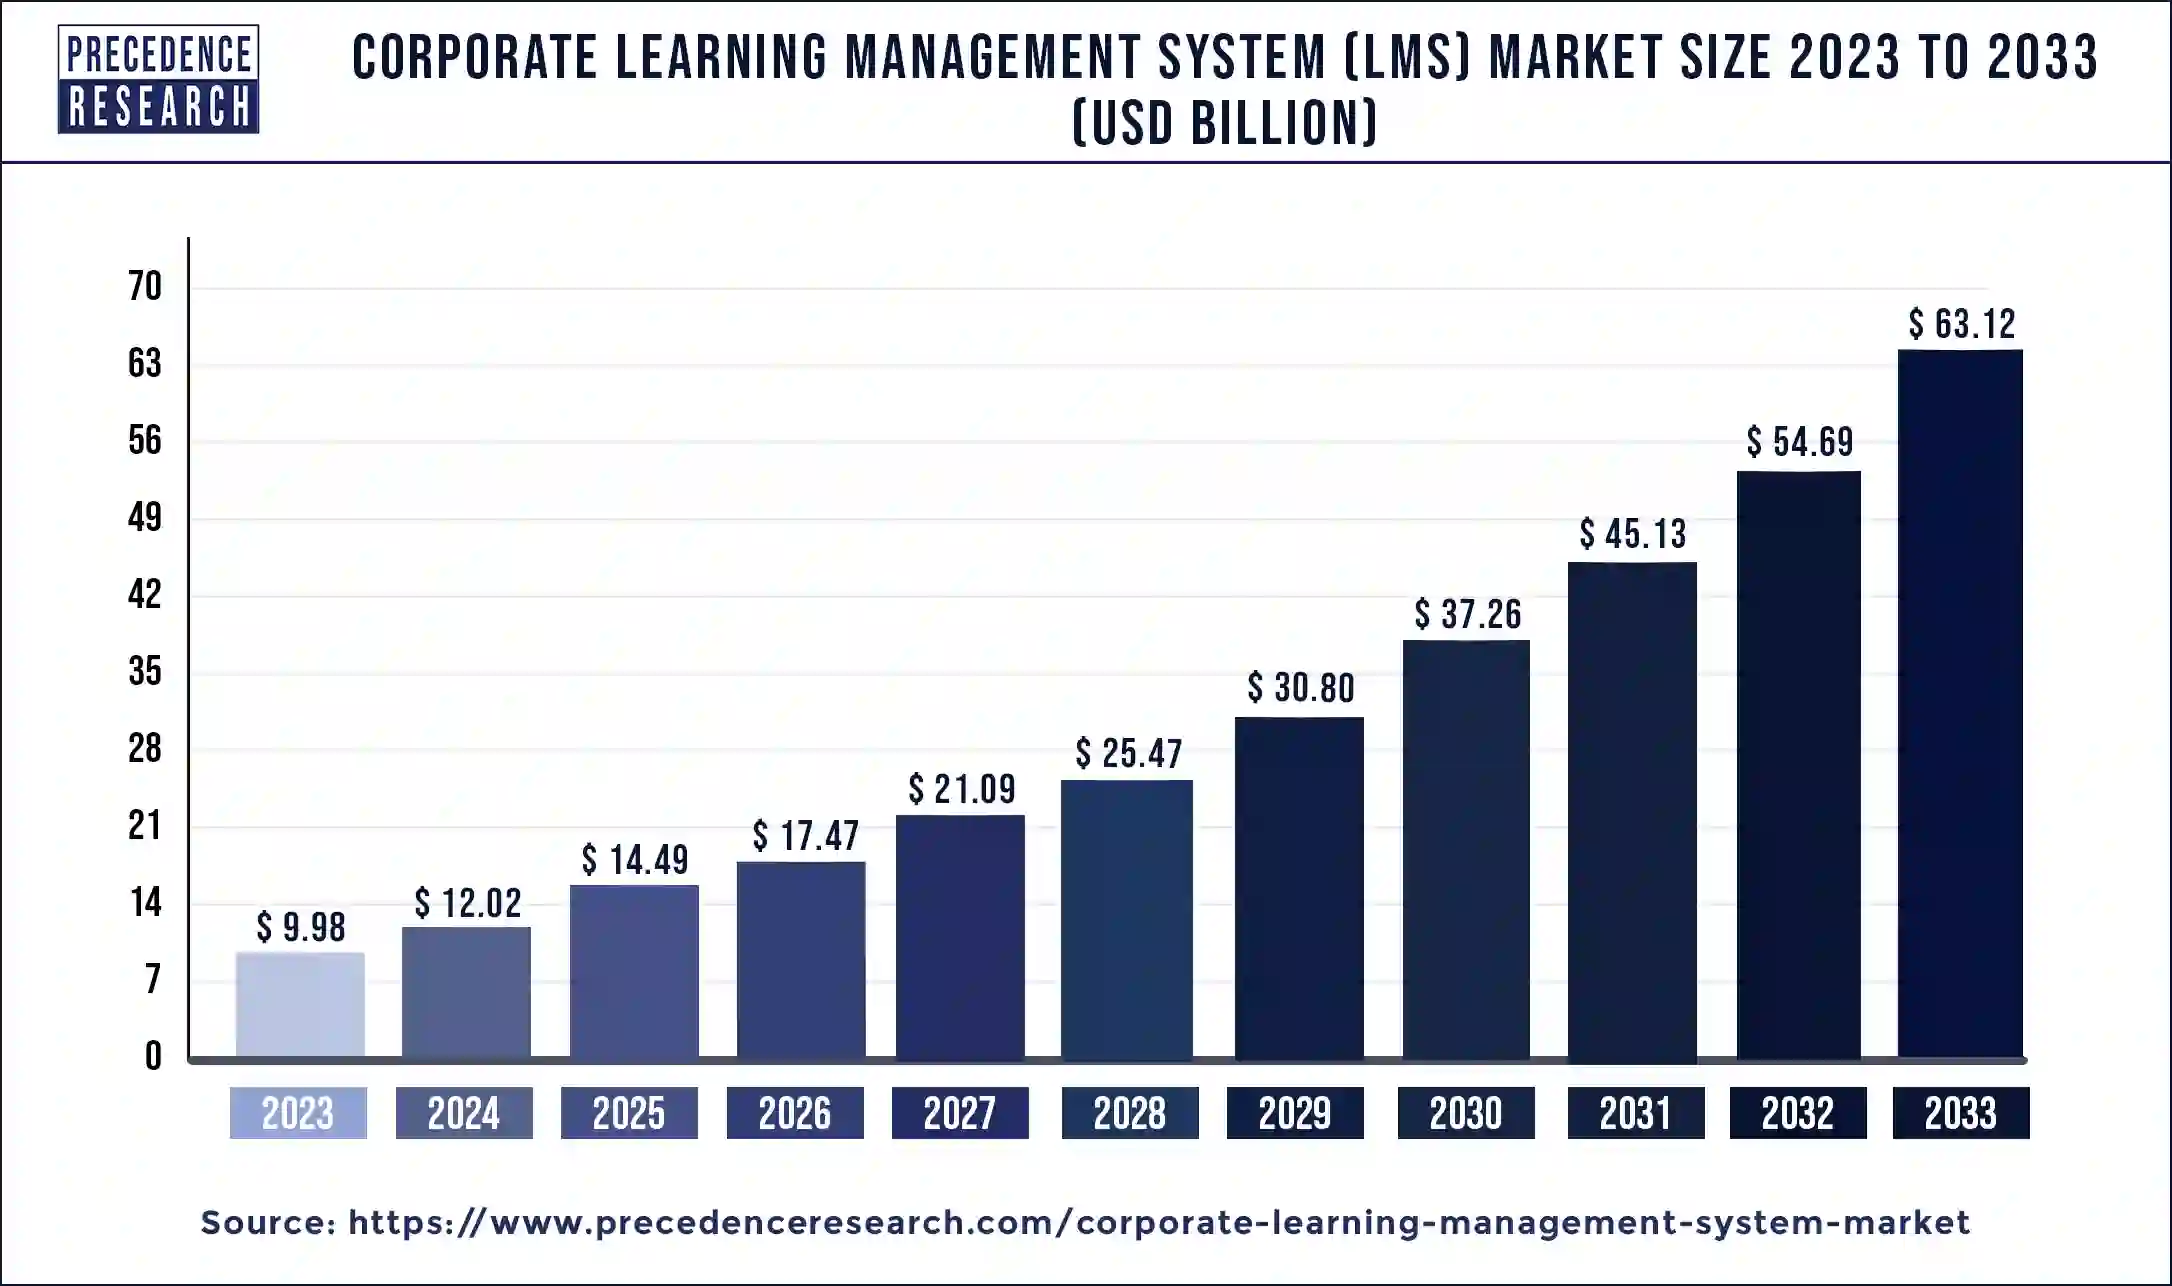 Corporate Learning Management System (LMS) Market Size 2024 to 2033